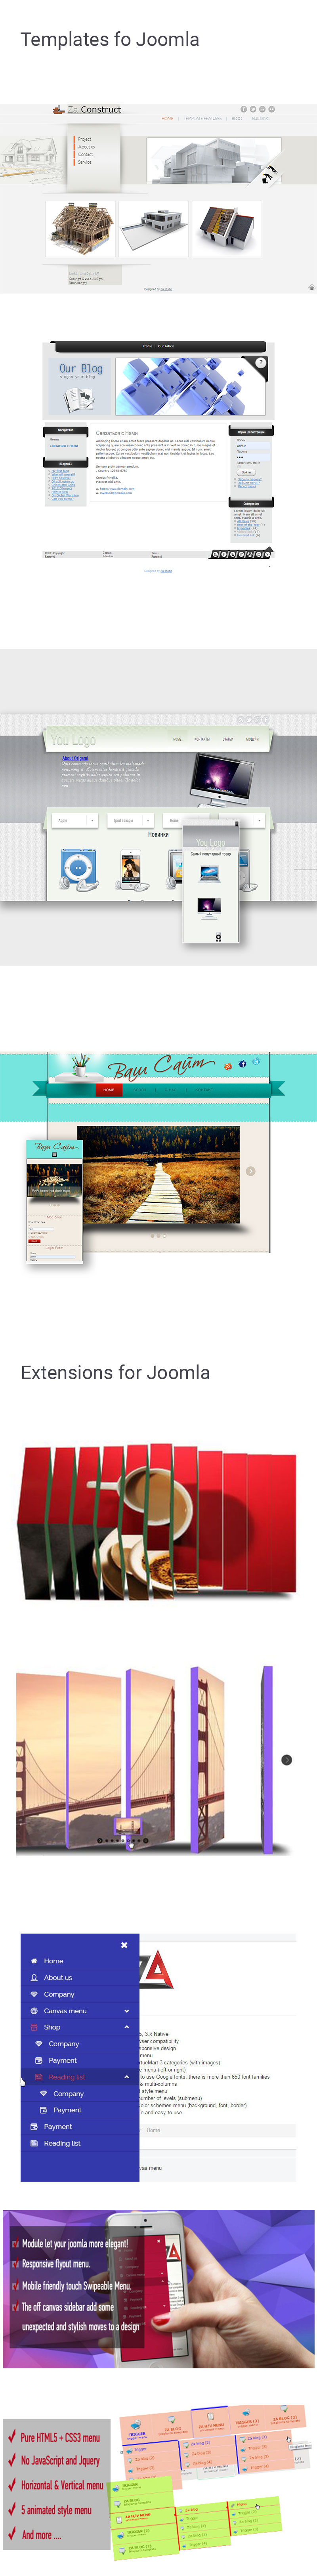 joomla- extensions and templates